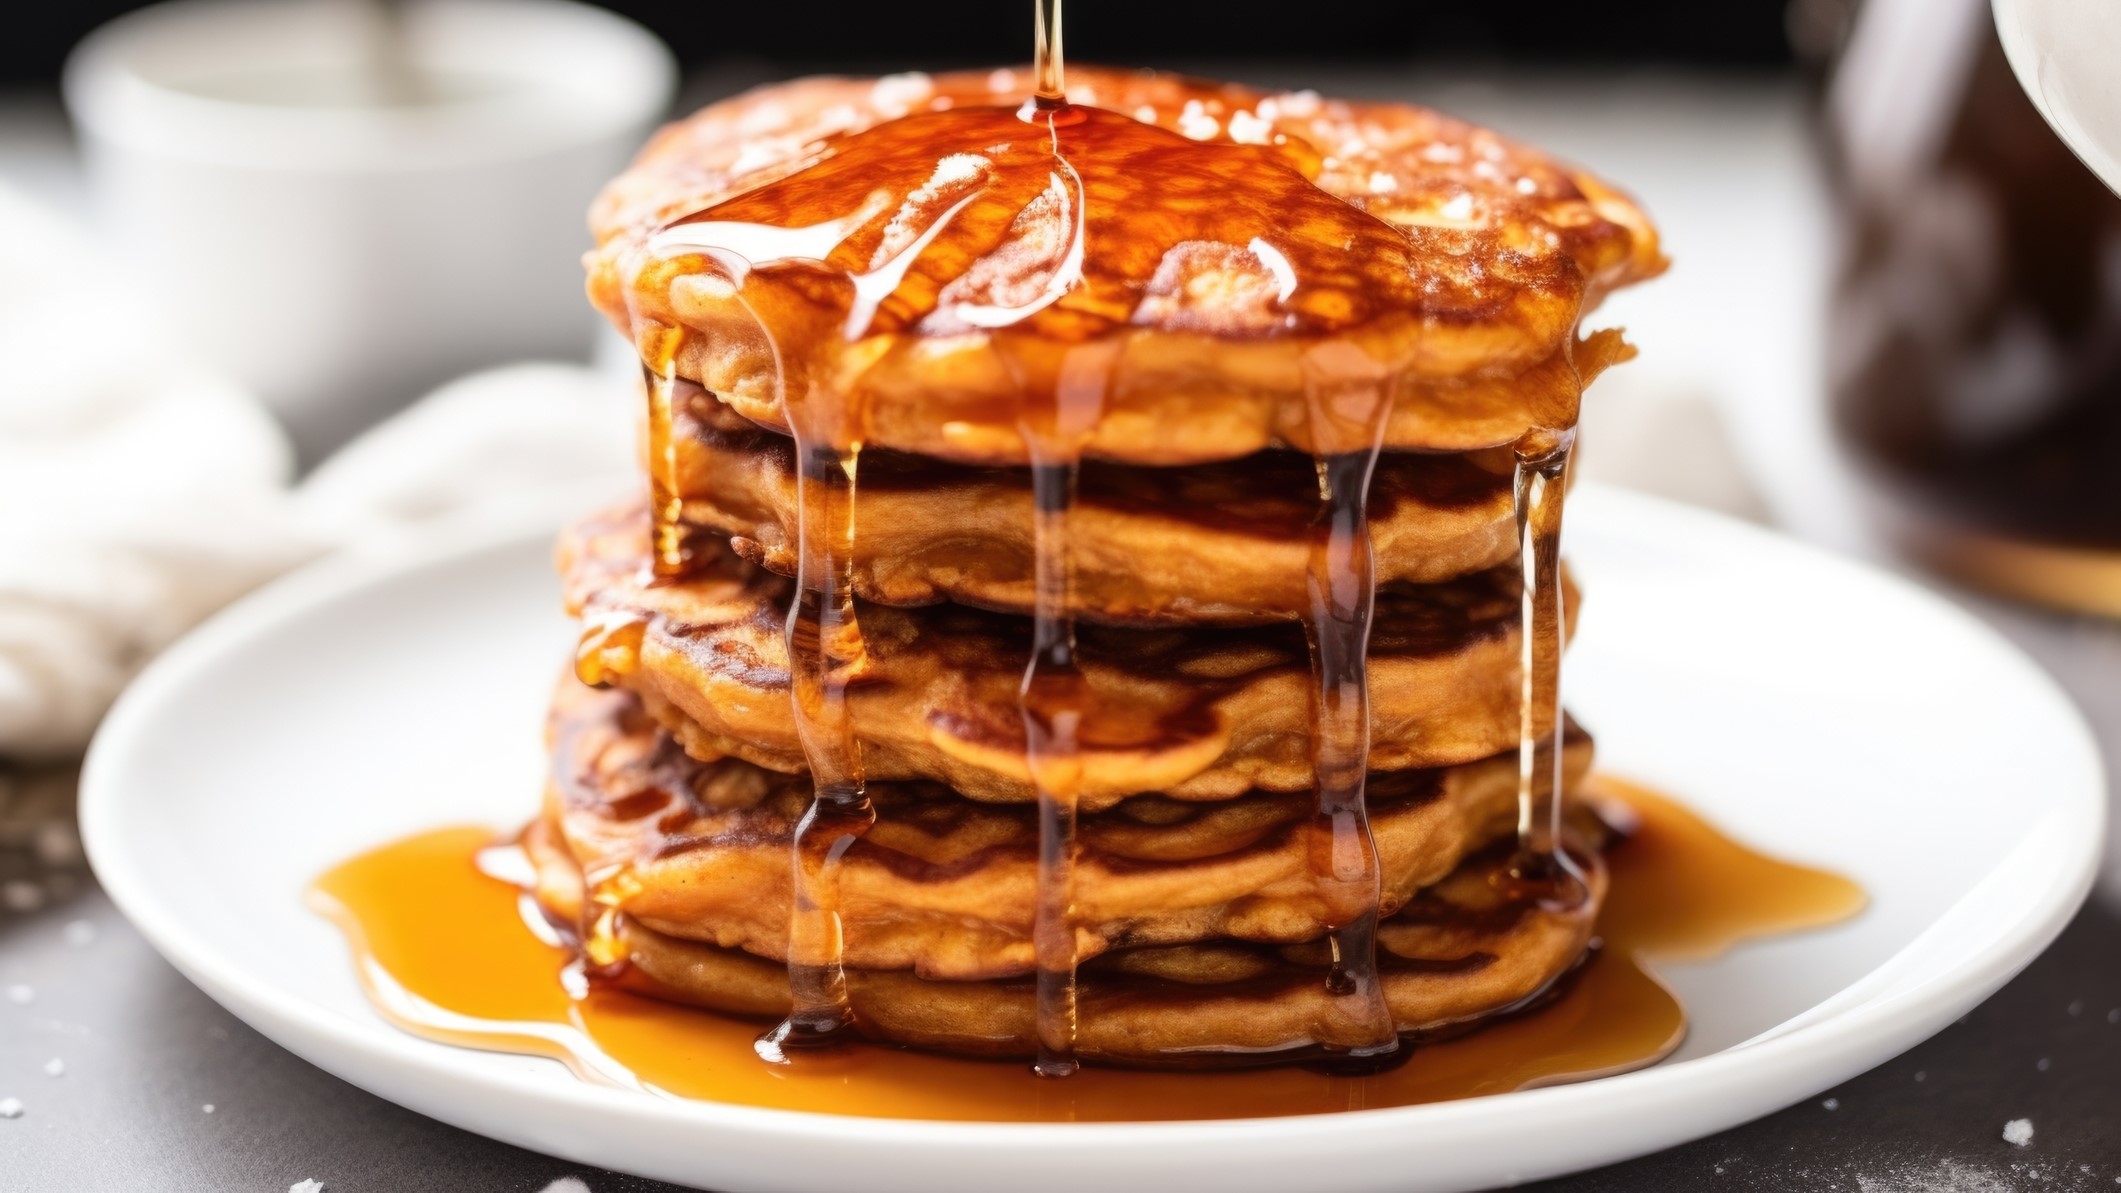 big stack of pancakes covered with syrup dripping on them